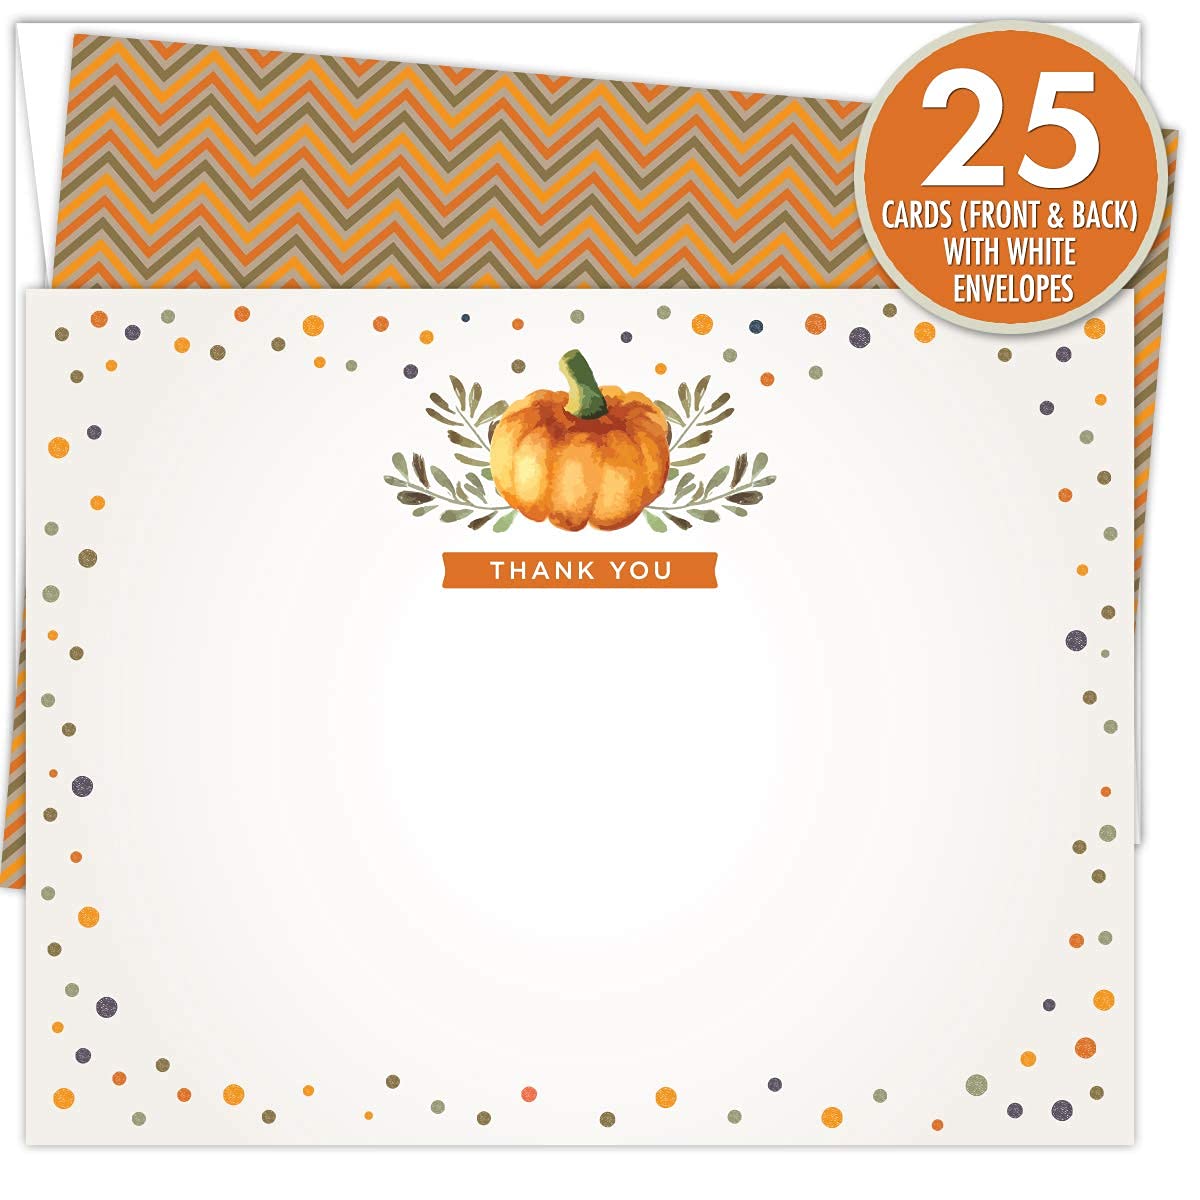 Koko Paper Co Little Pumpkin Baby Shower Invitations, Diaper Raffle Tickets and Matching Thank You Cards | 75 Sets | 125 Pcs Total